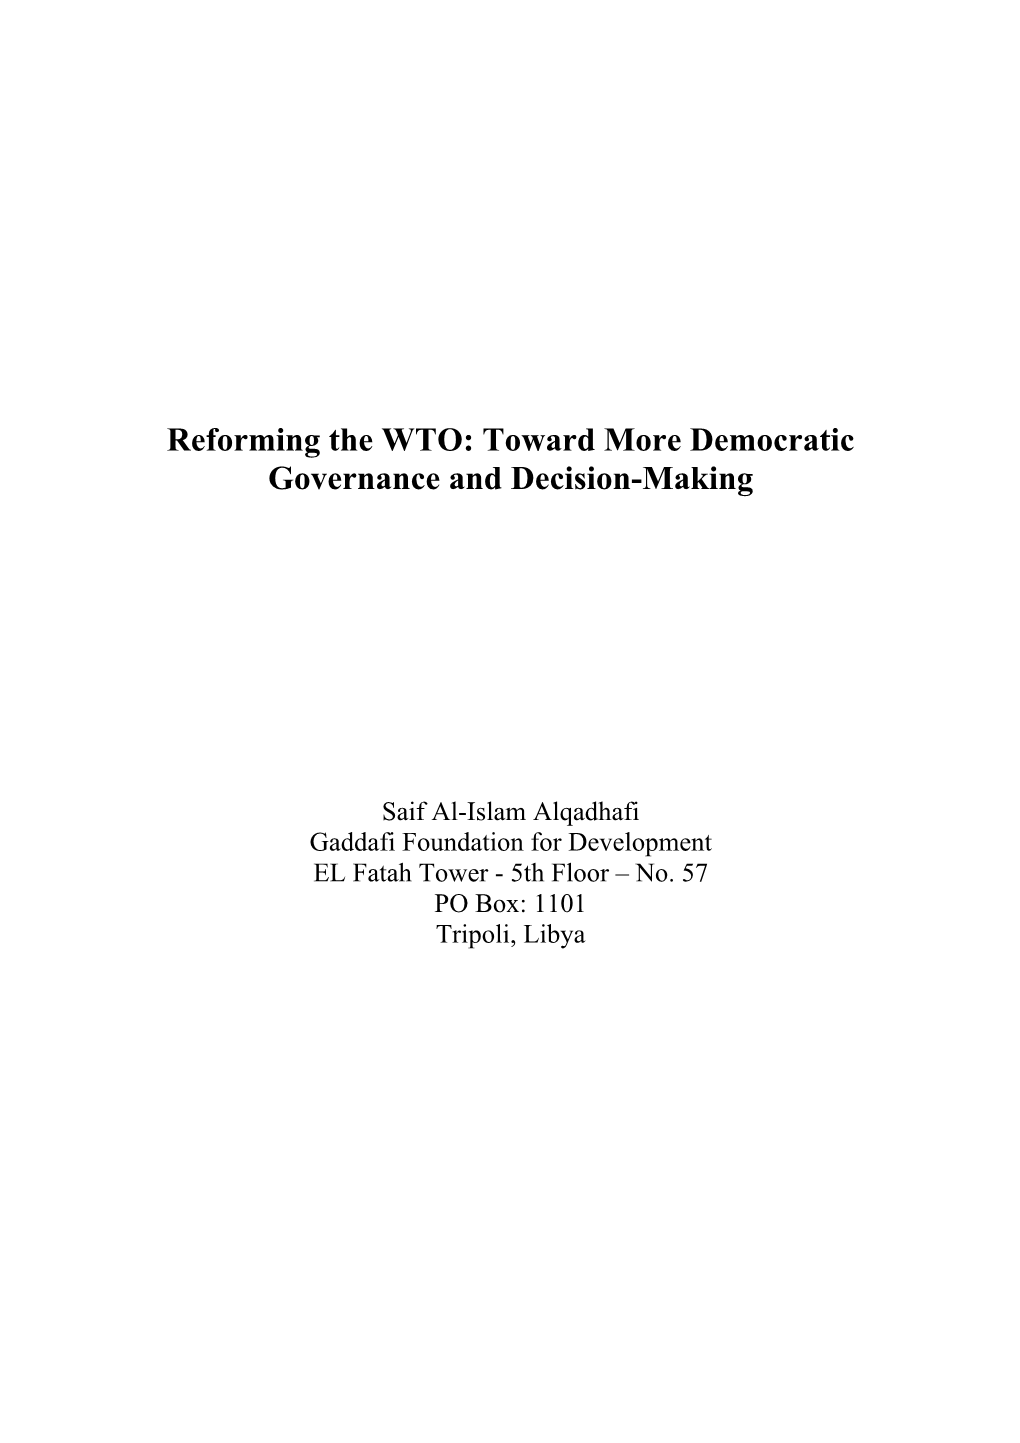 Reforming the WTO: Toward More Democratic Governance and Decision-Making